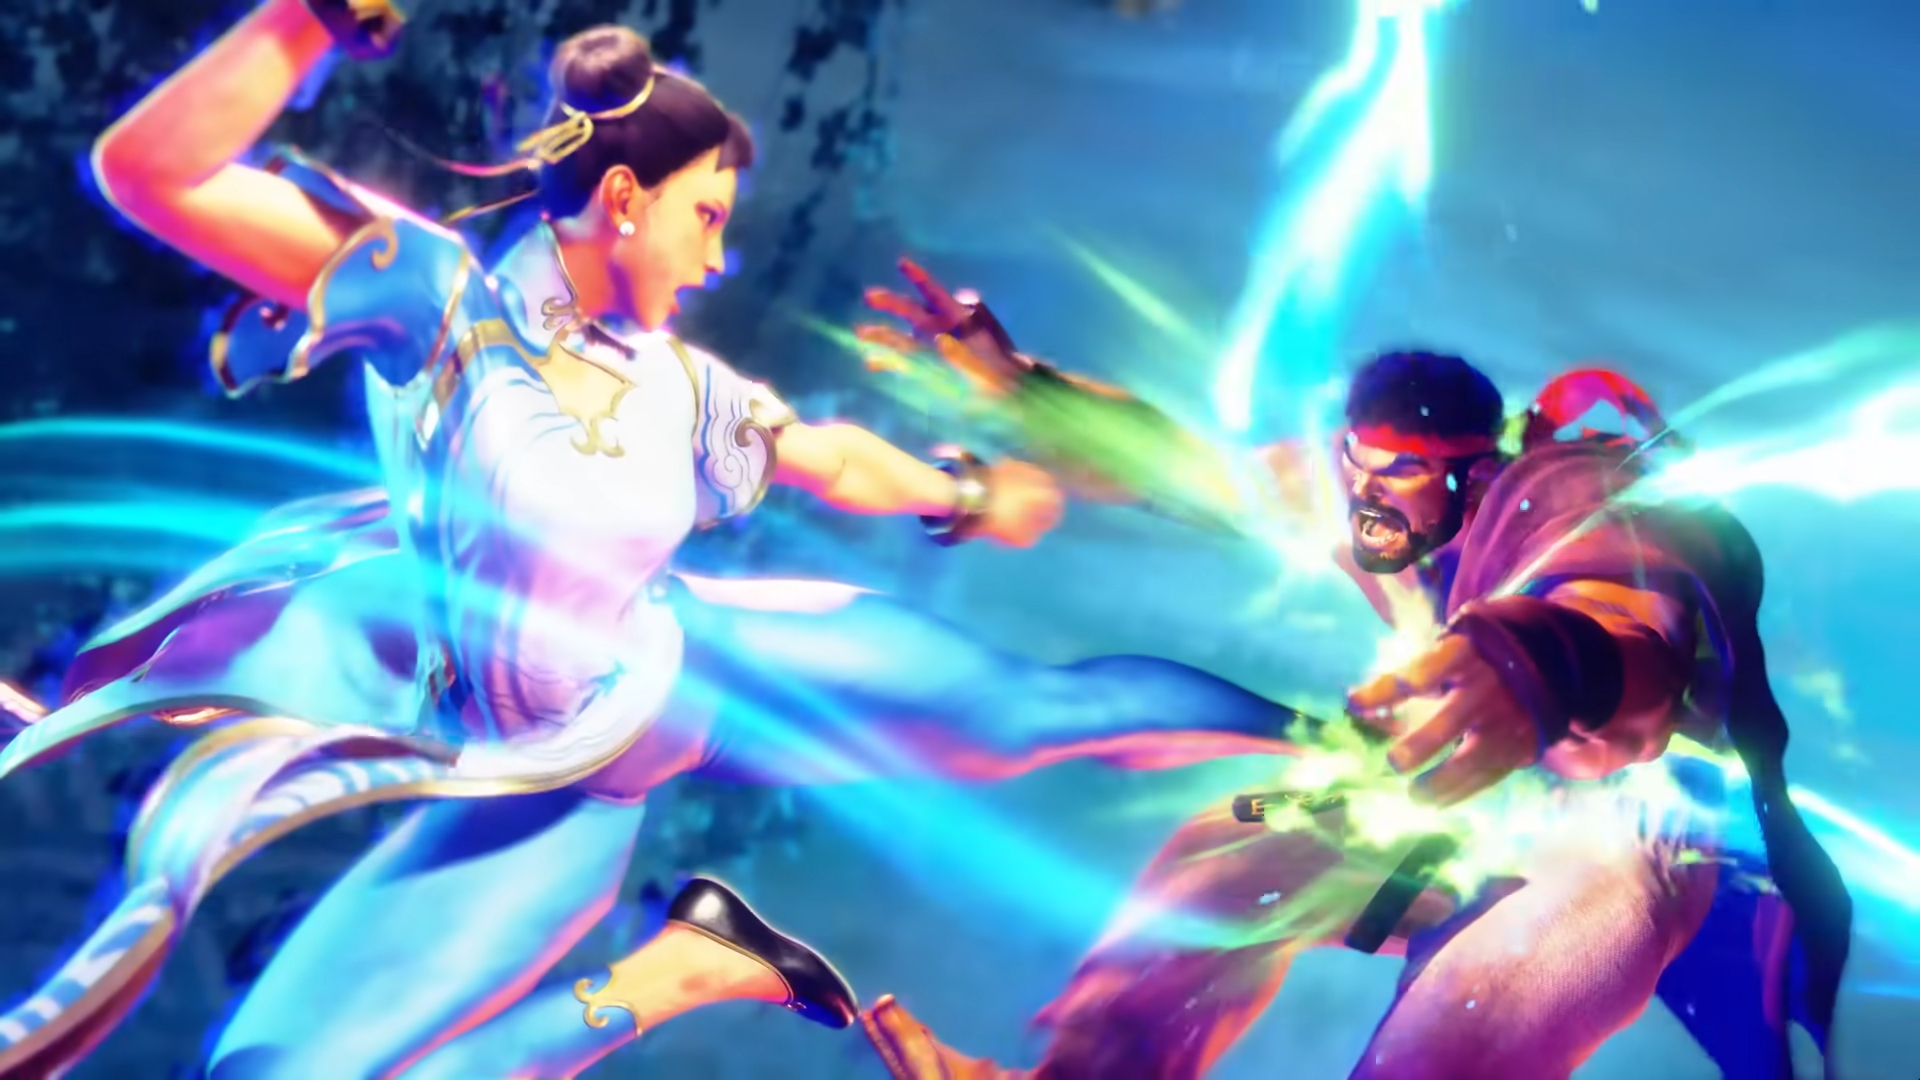 New Street Fighter 6 How to Play Videos Focus on Juri and Guile